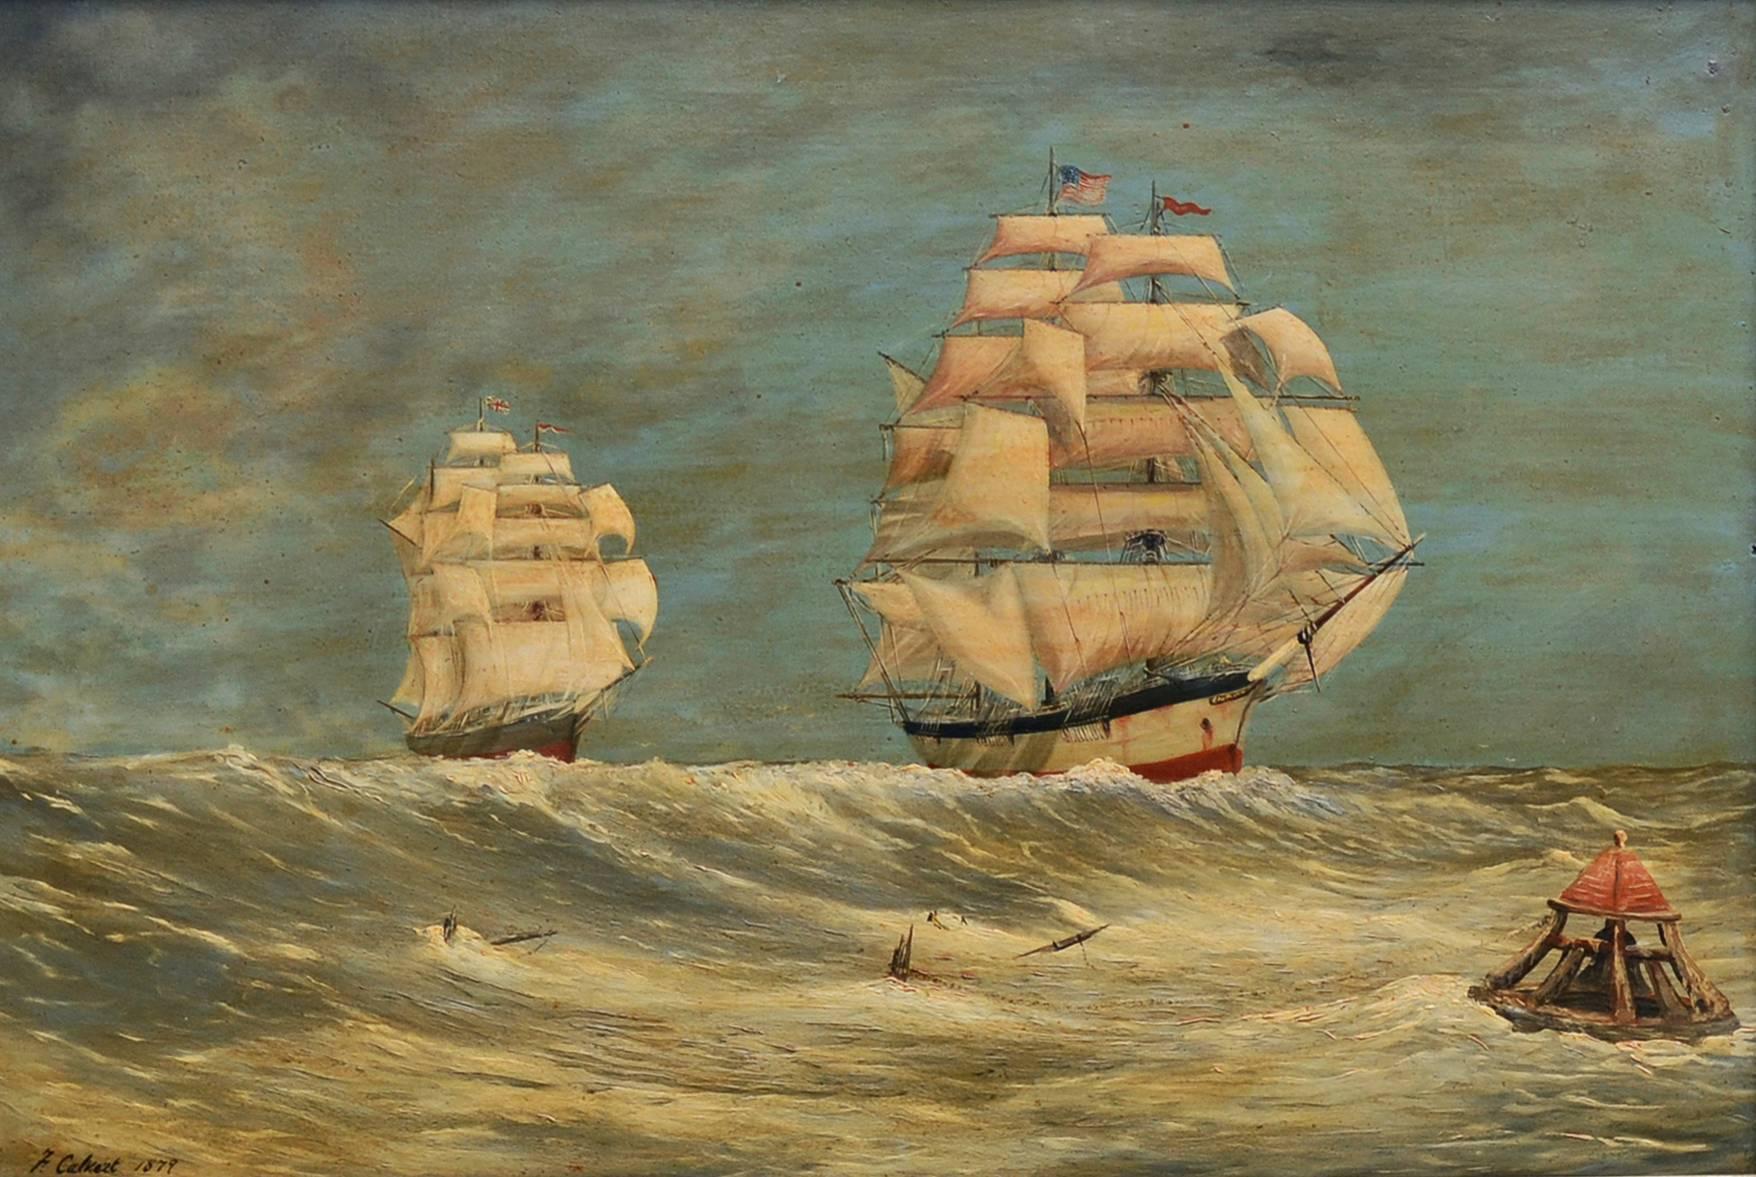 1870s Schooners Under Sail After Frederick Calvert - Painting by Unknown